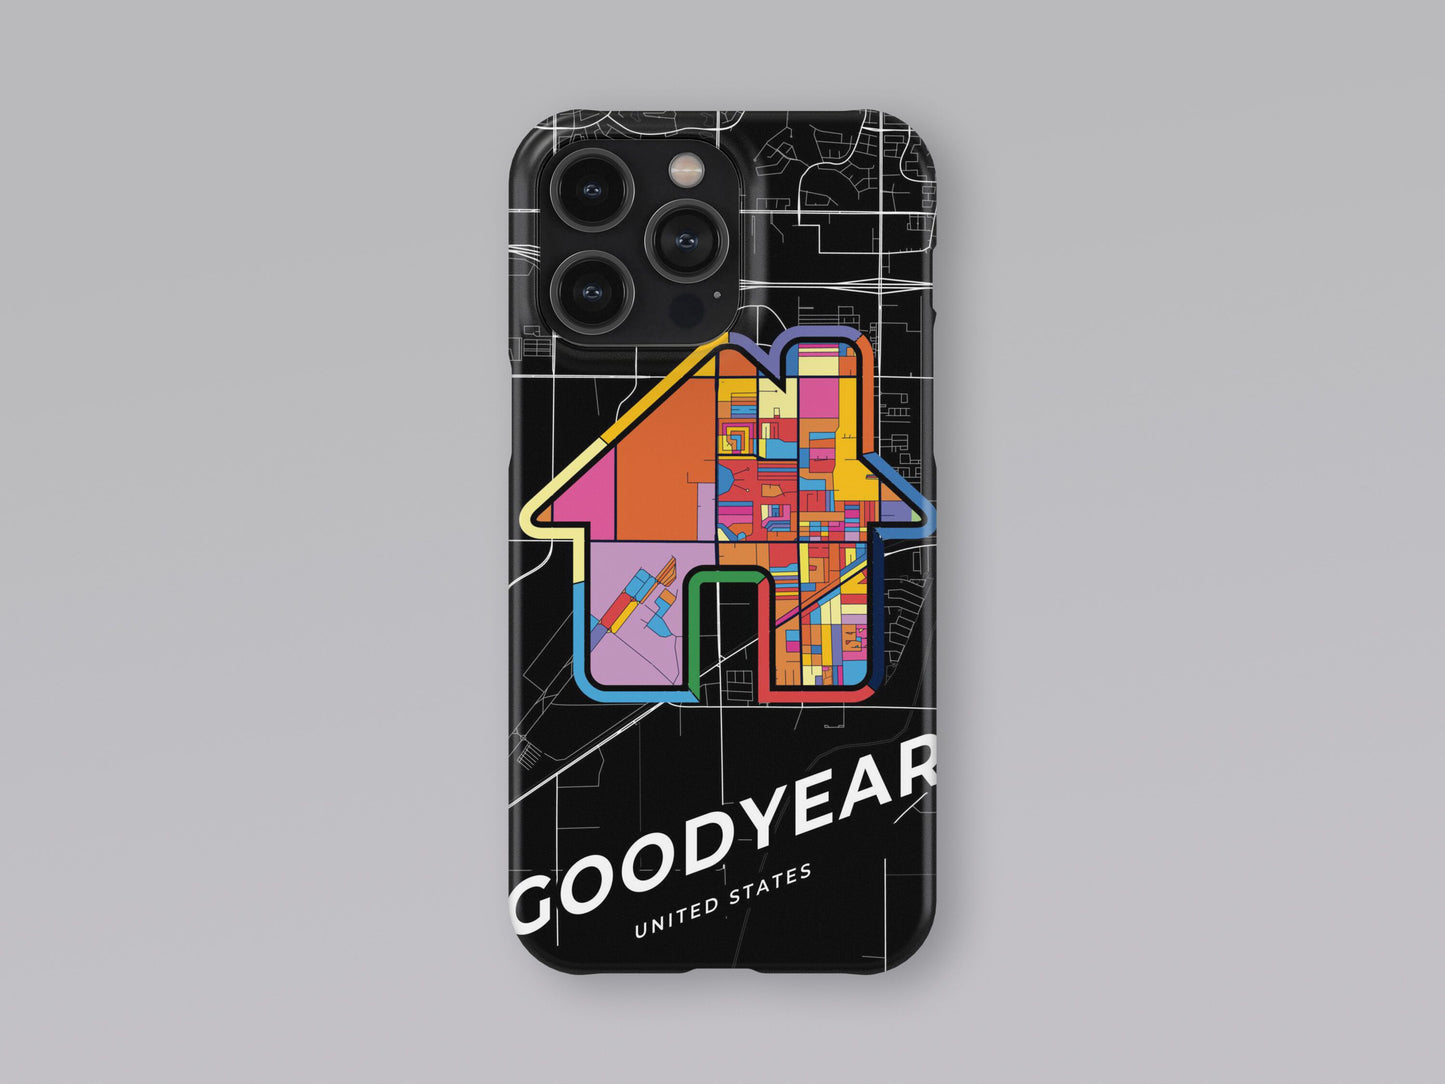 Goodyear Arizona slim phone case with colorful icon. Birthday, wedding or housewarming gift. Couple match cases. 3